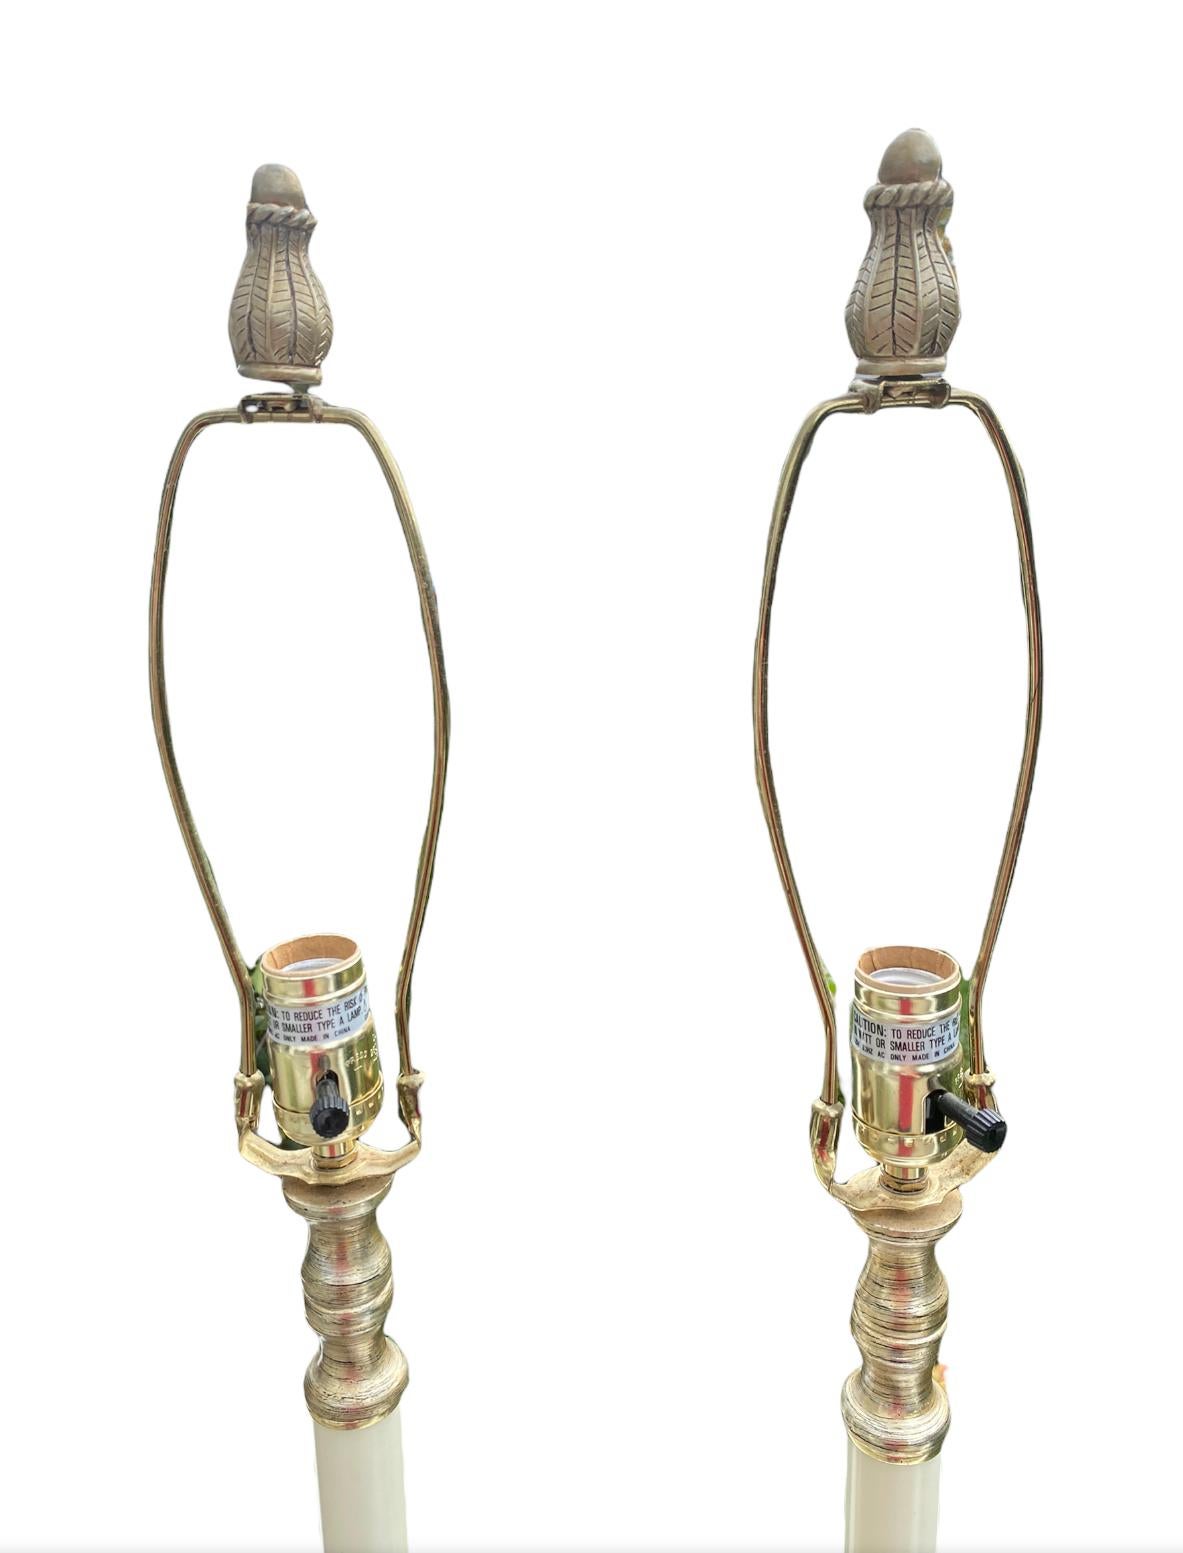 Handsome pair of tall table lamps in Tuscan style. Ornate silhouette with shallow trays. Accommodate all modern style bulbs. In good working order.